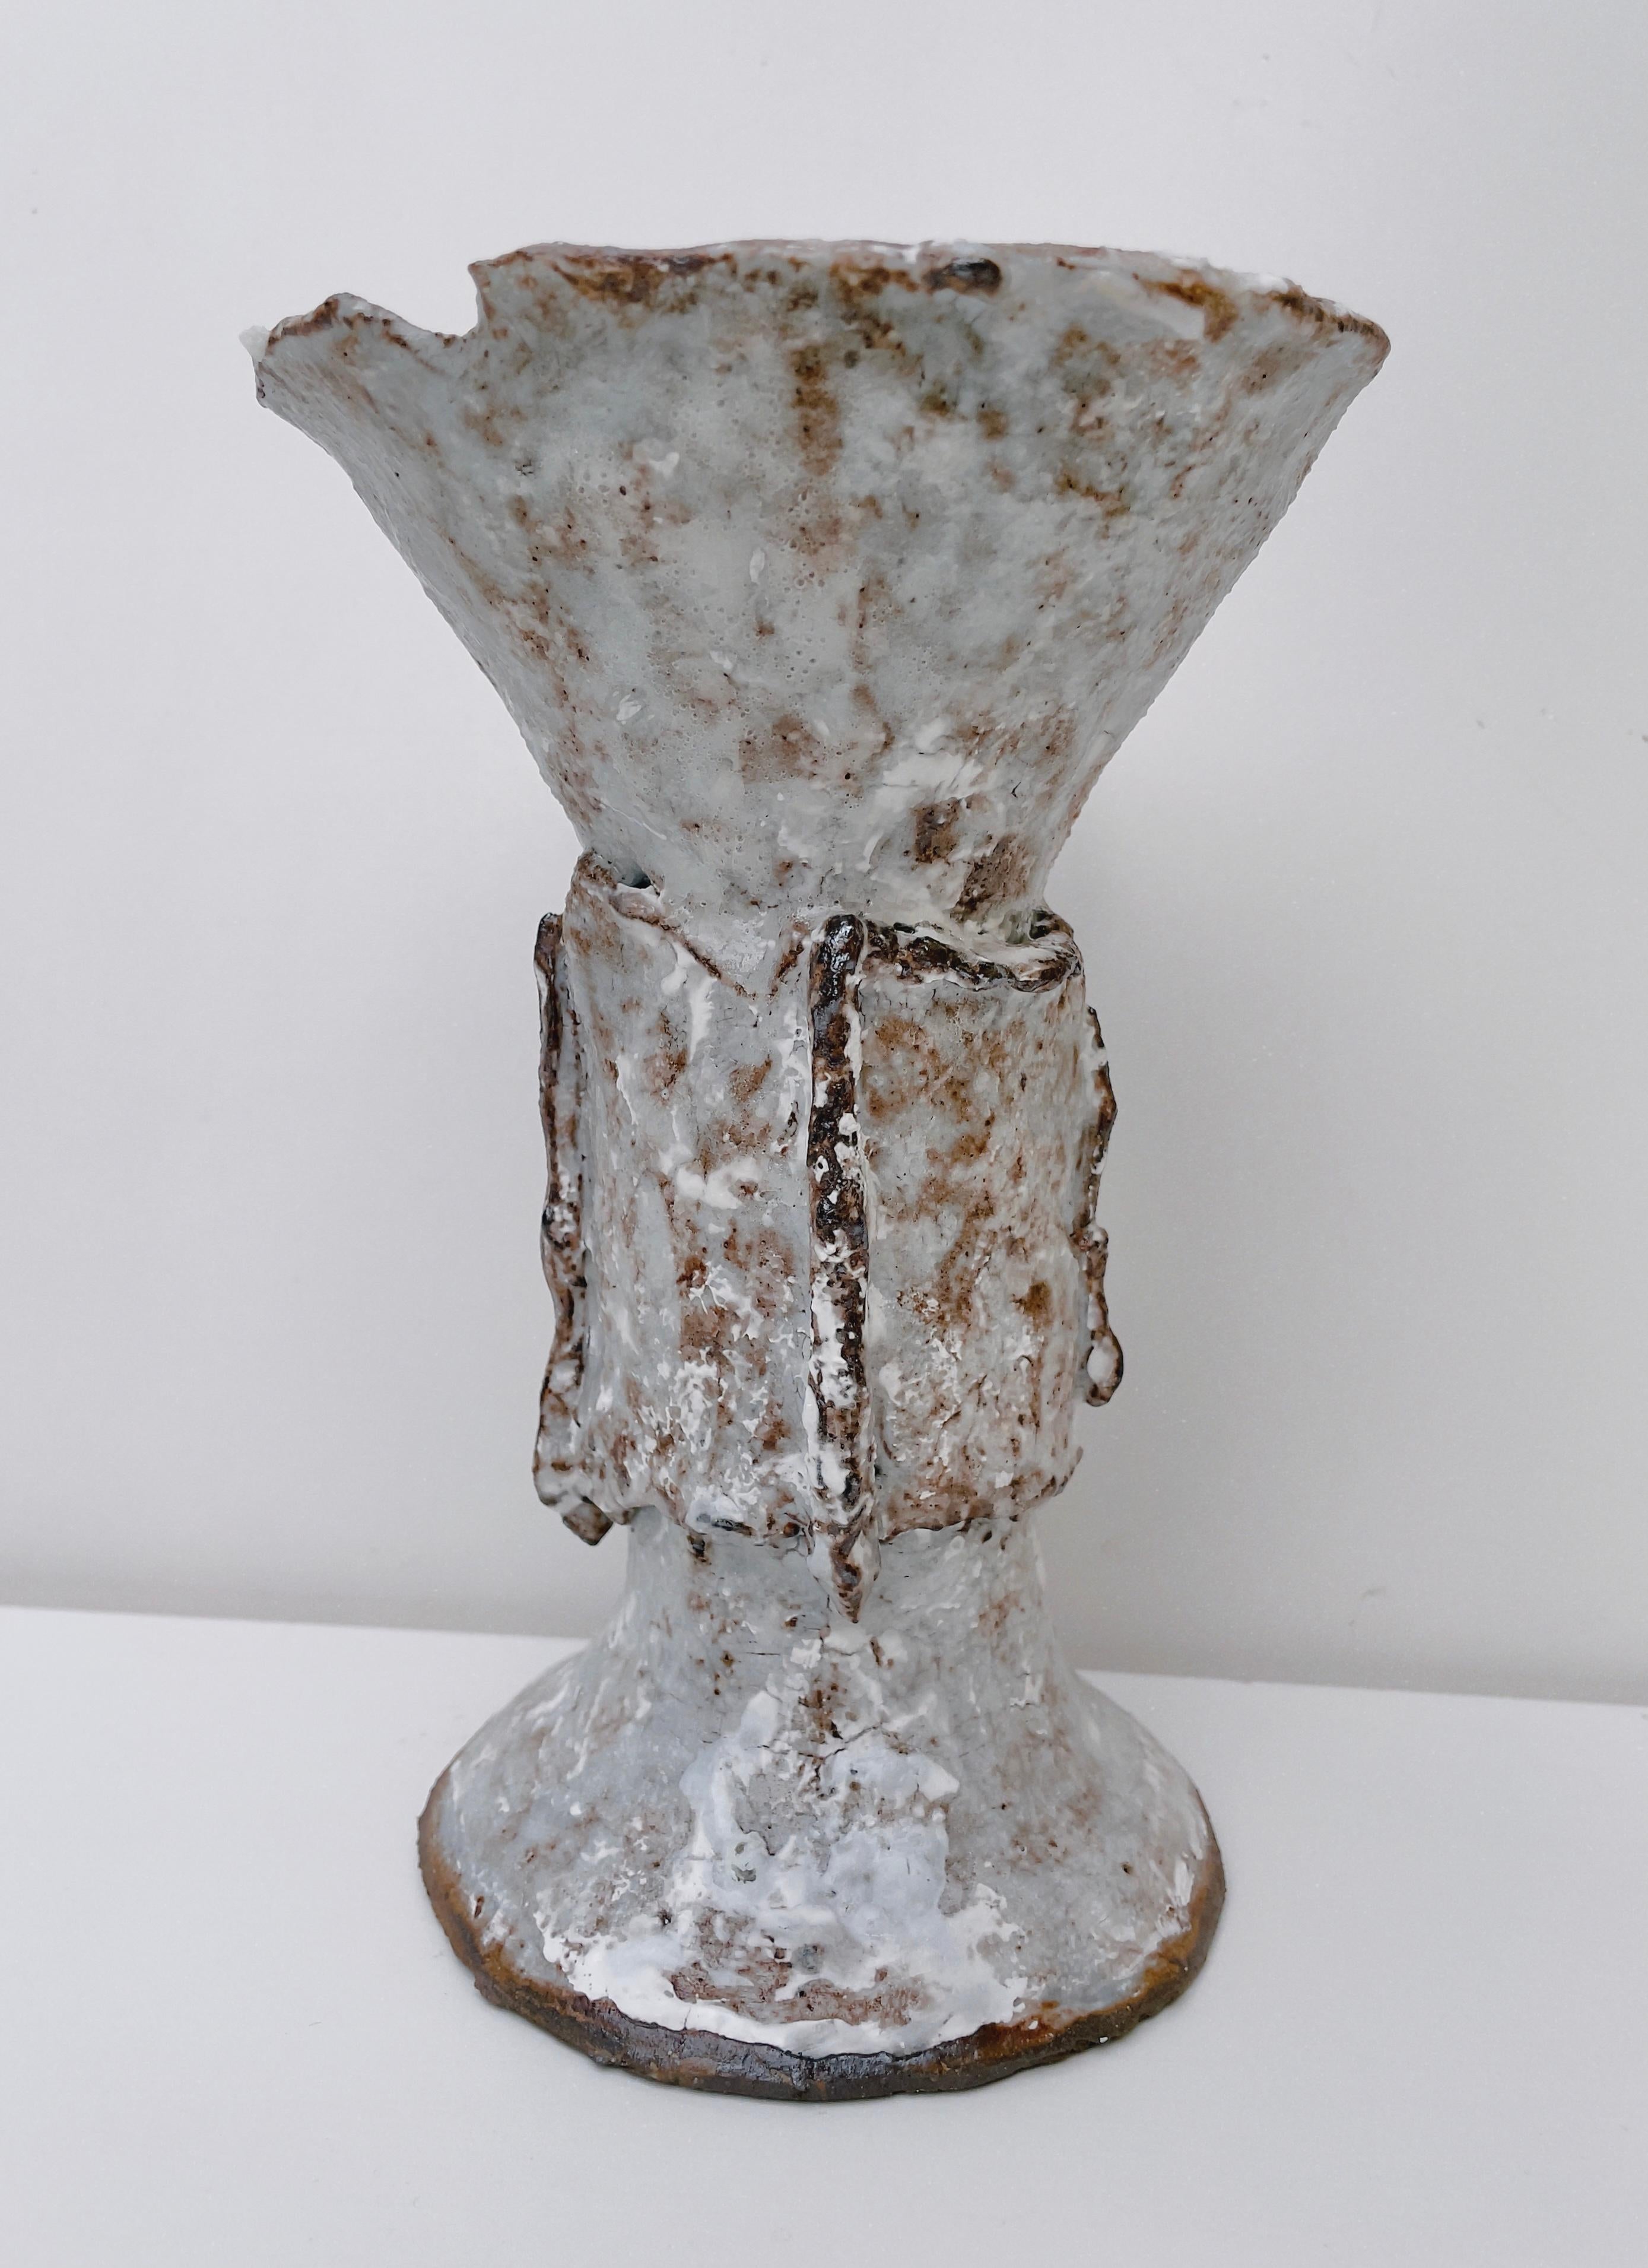 Rituals vase by Lisa Geue
Dimensions: D 19,5 x W 13 x H 13 cm
Materials: Terracotta, Kaolin wash, Shino glazes, multiple firings.
Non-functional.


By researching ancient and indigenous rites, practices, and rituals, Geue observes the meaning